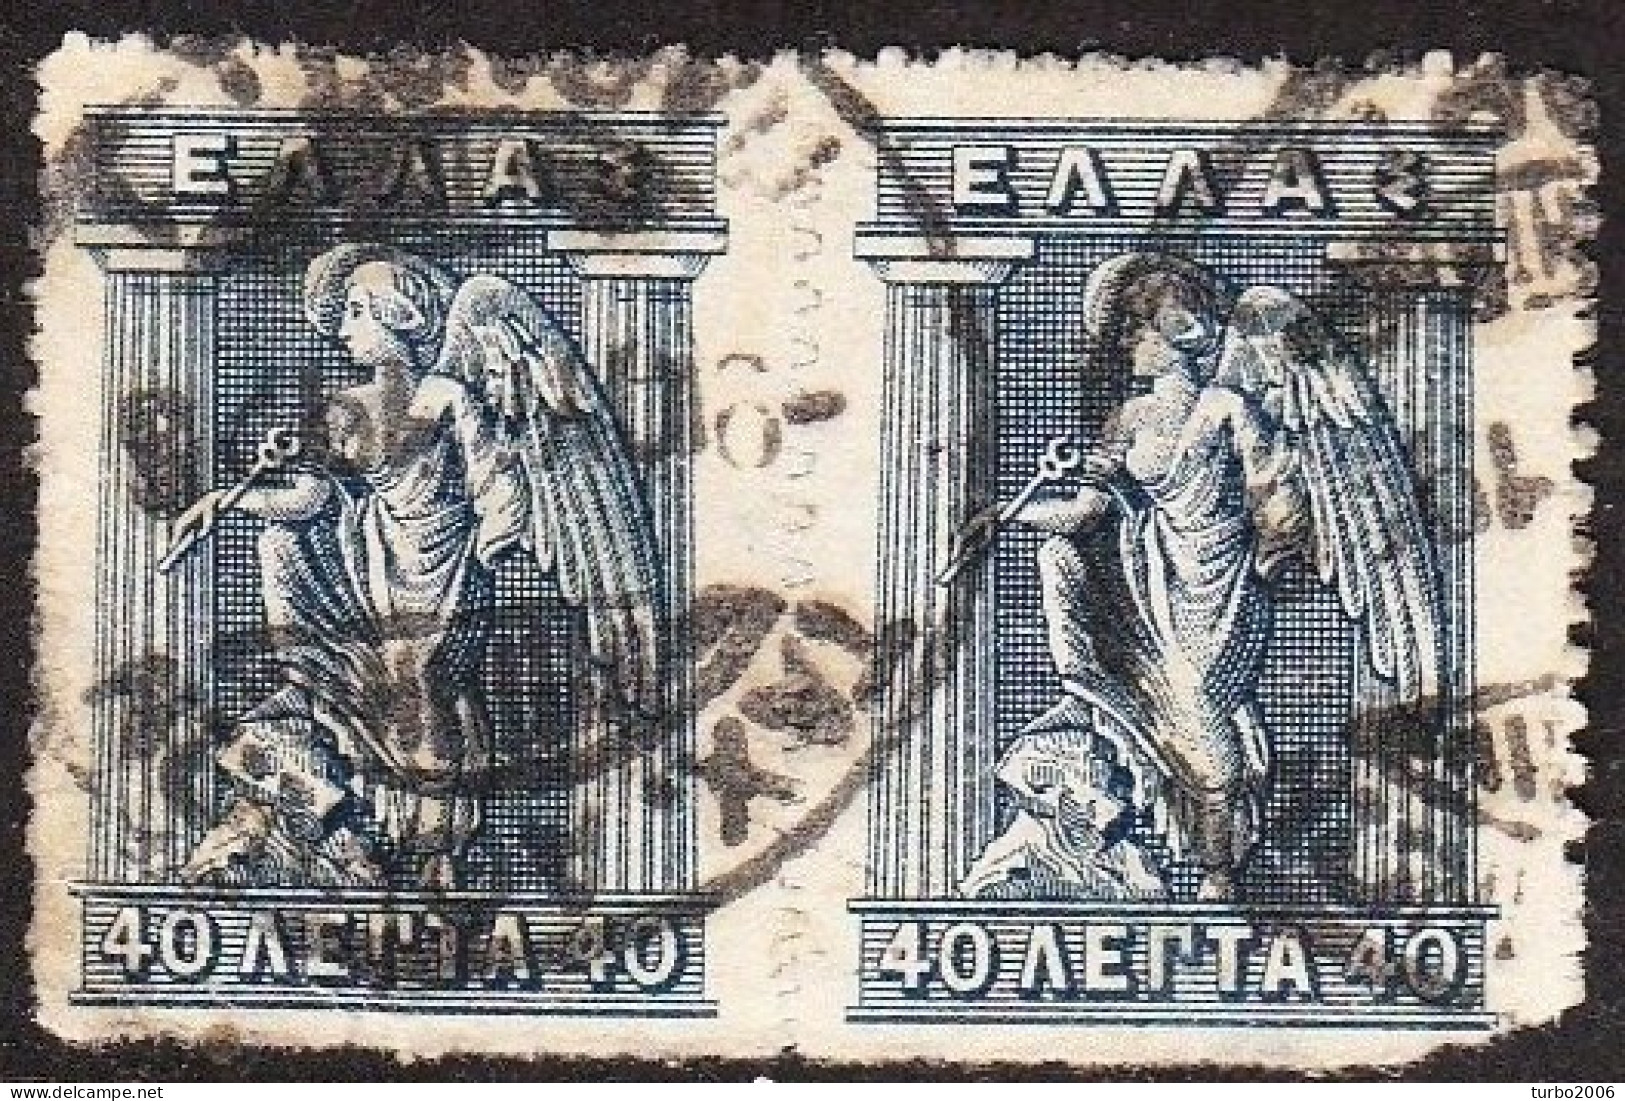 GREECE 1913-27 Lithographic Issue 40 L Blue VIENNA Issue With Special Perforation In PAIR !! Vl. 237 B - Usados